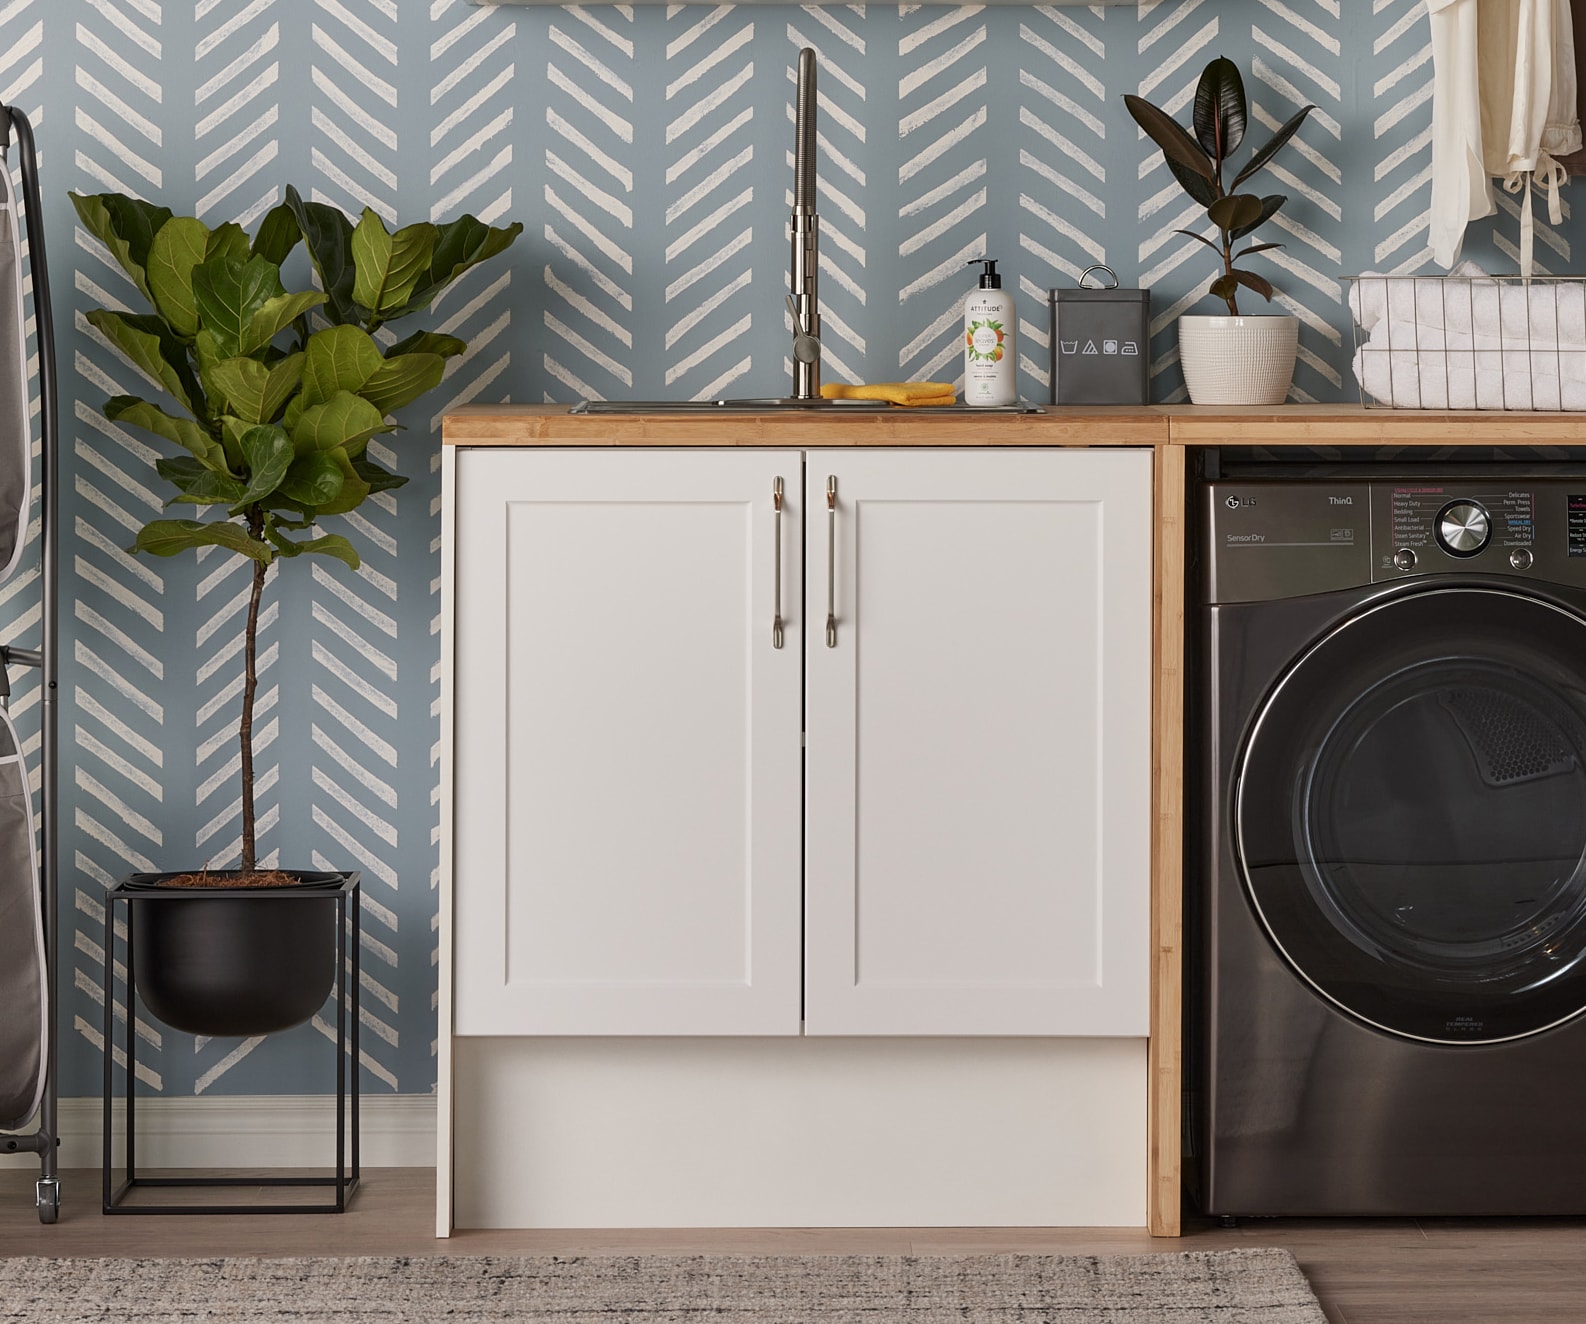 White storage cabinets in a laundry room